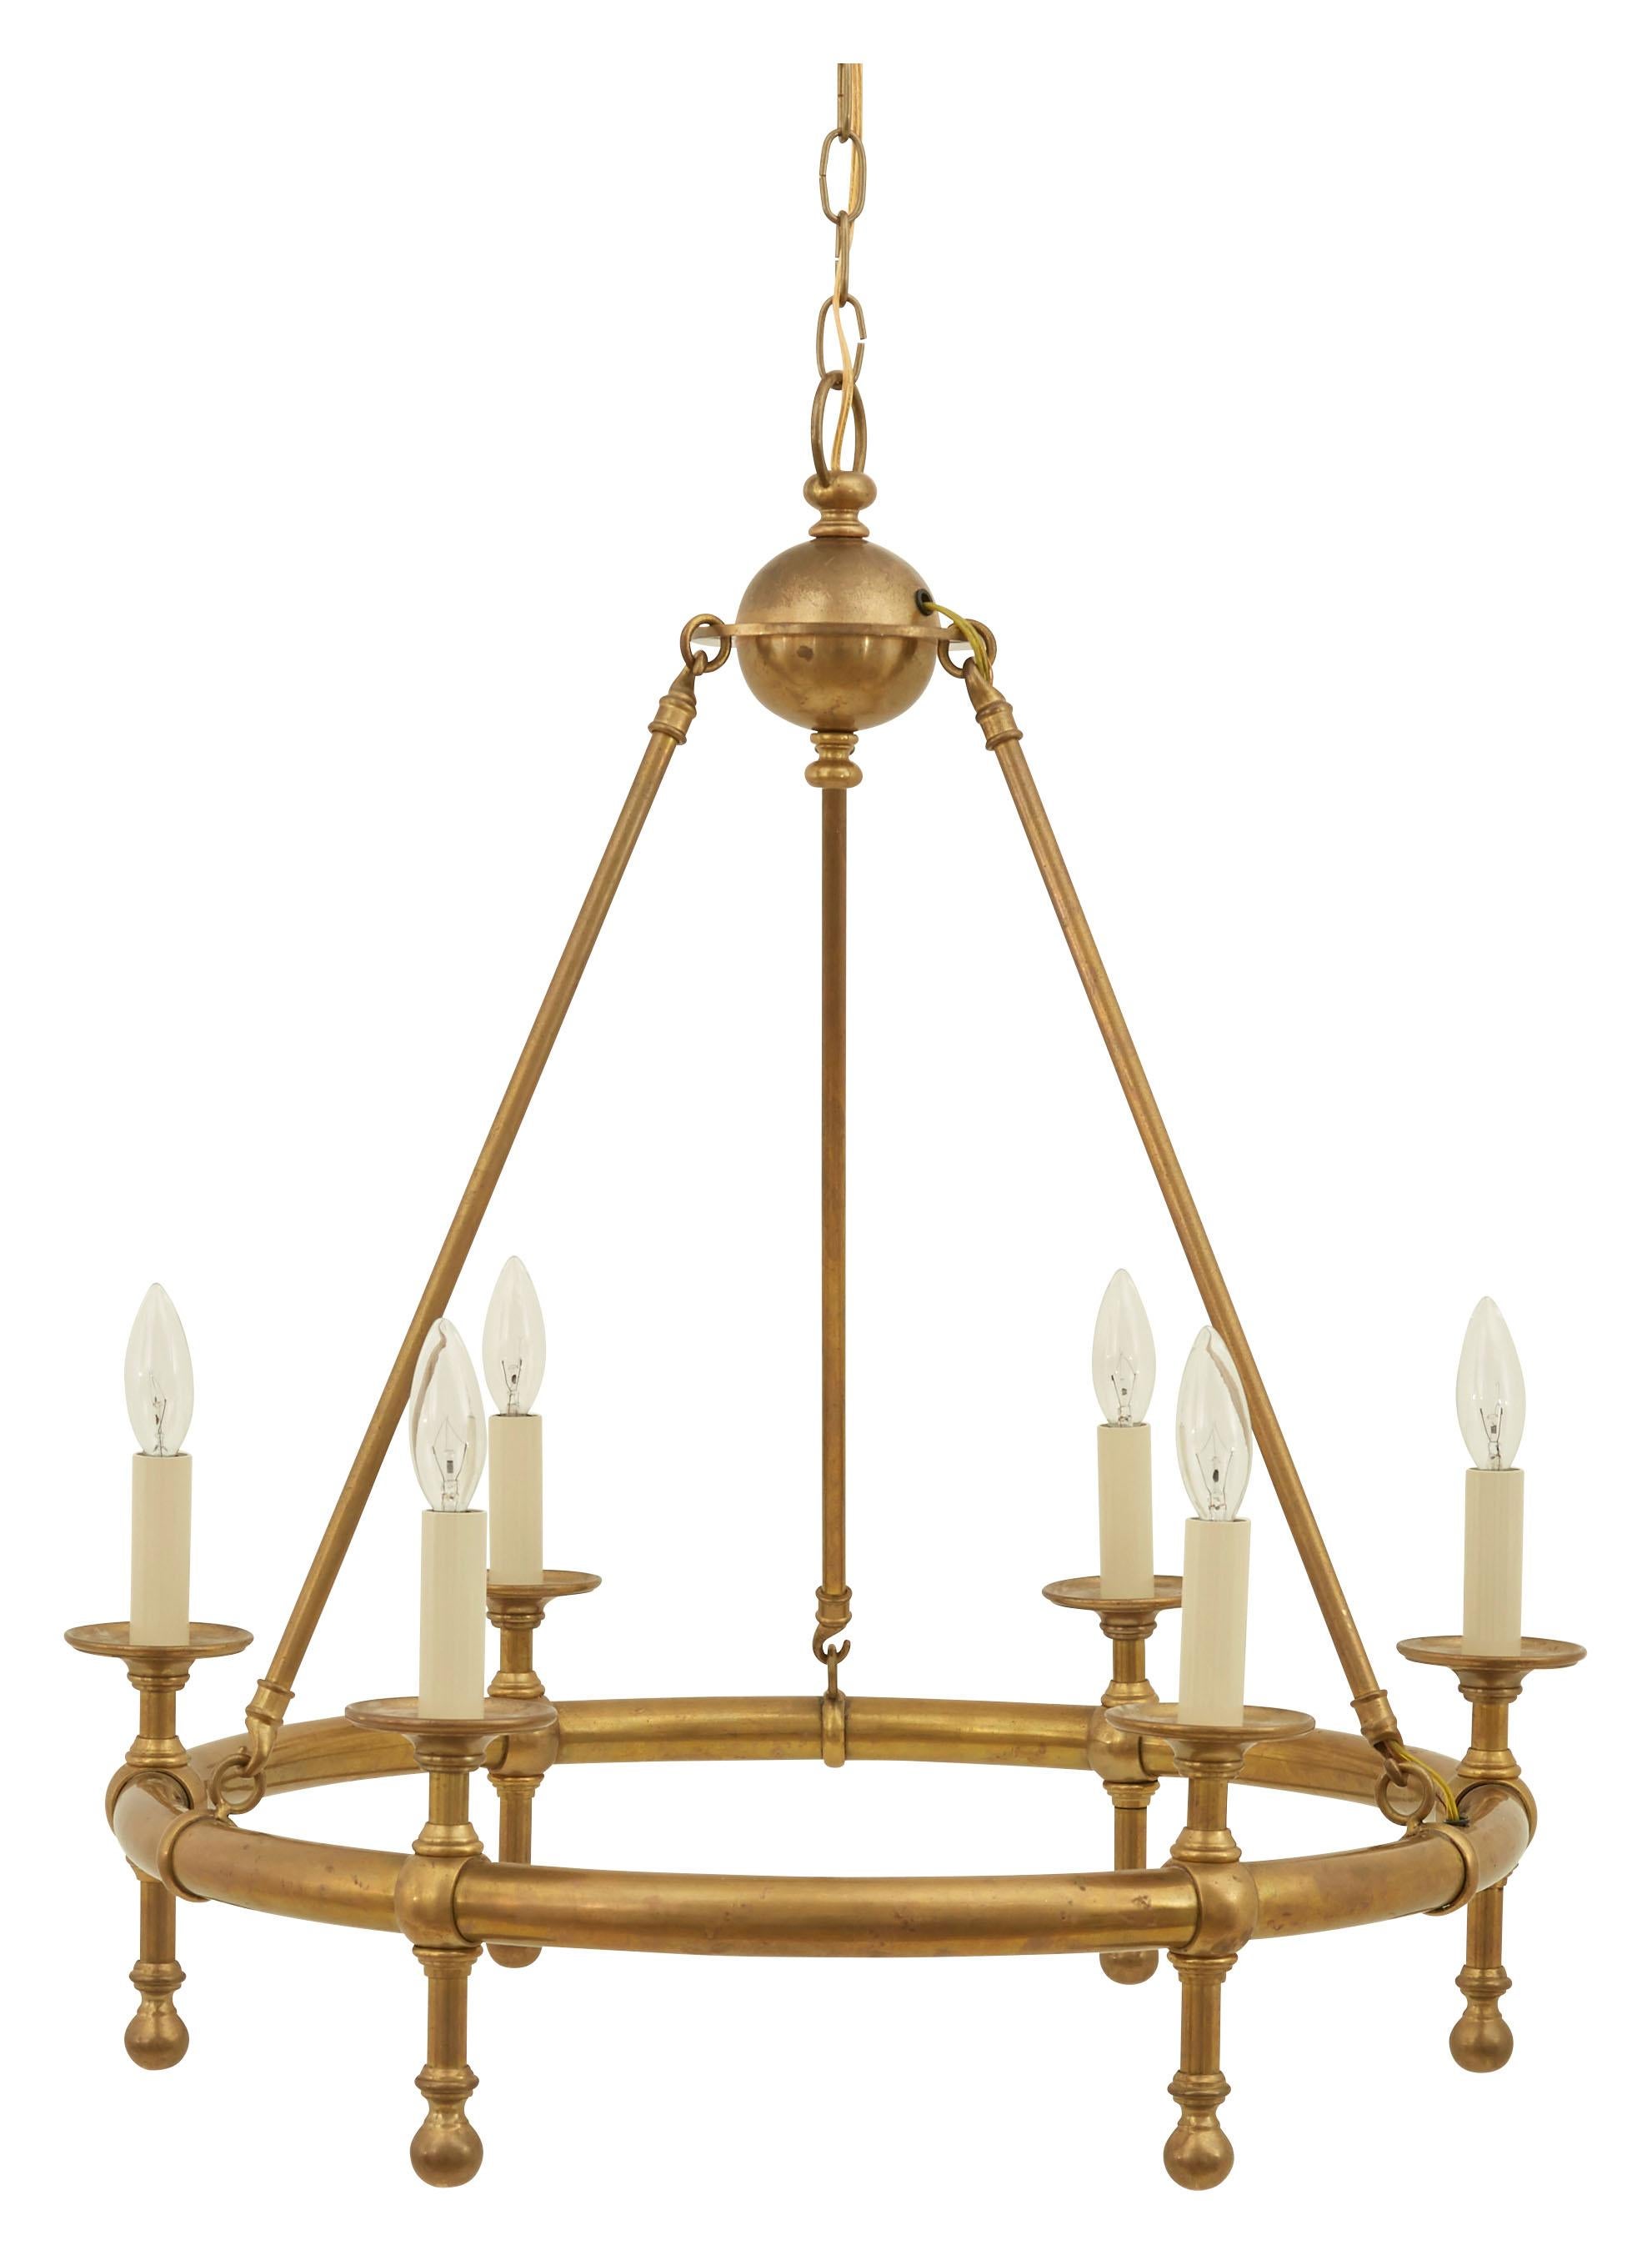 American Round Brass Candle-Style Chandelier